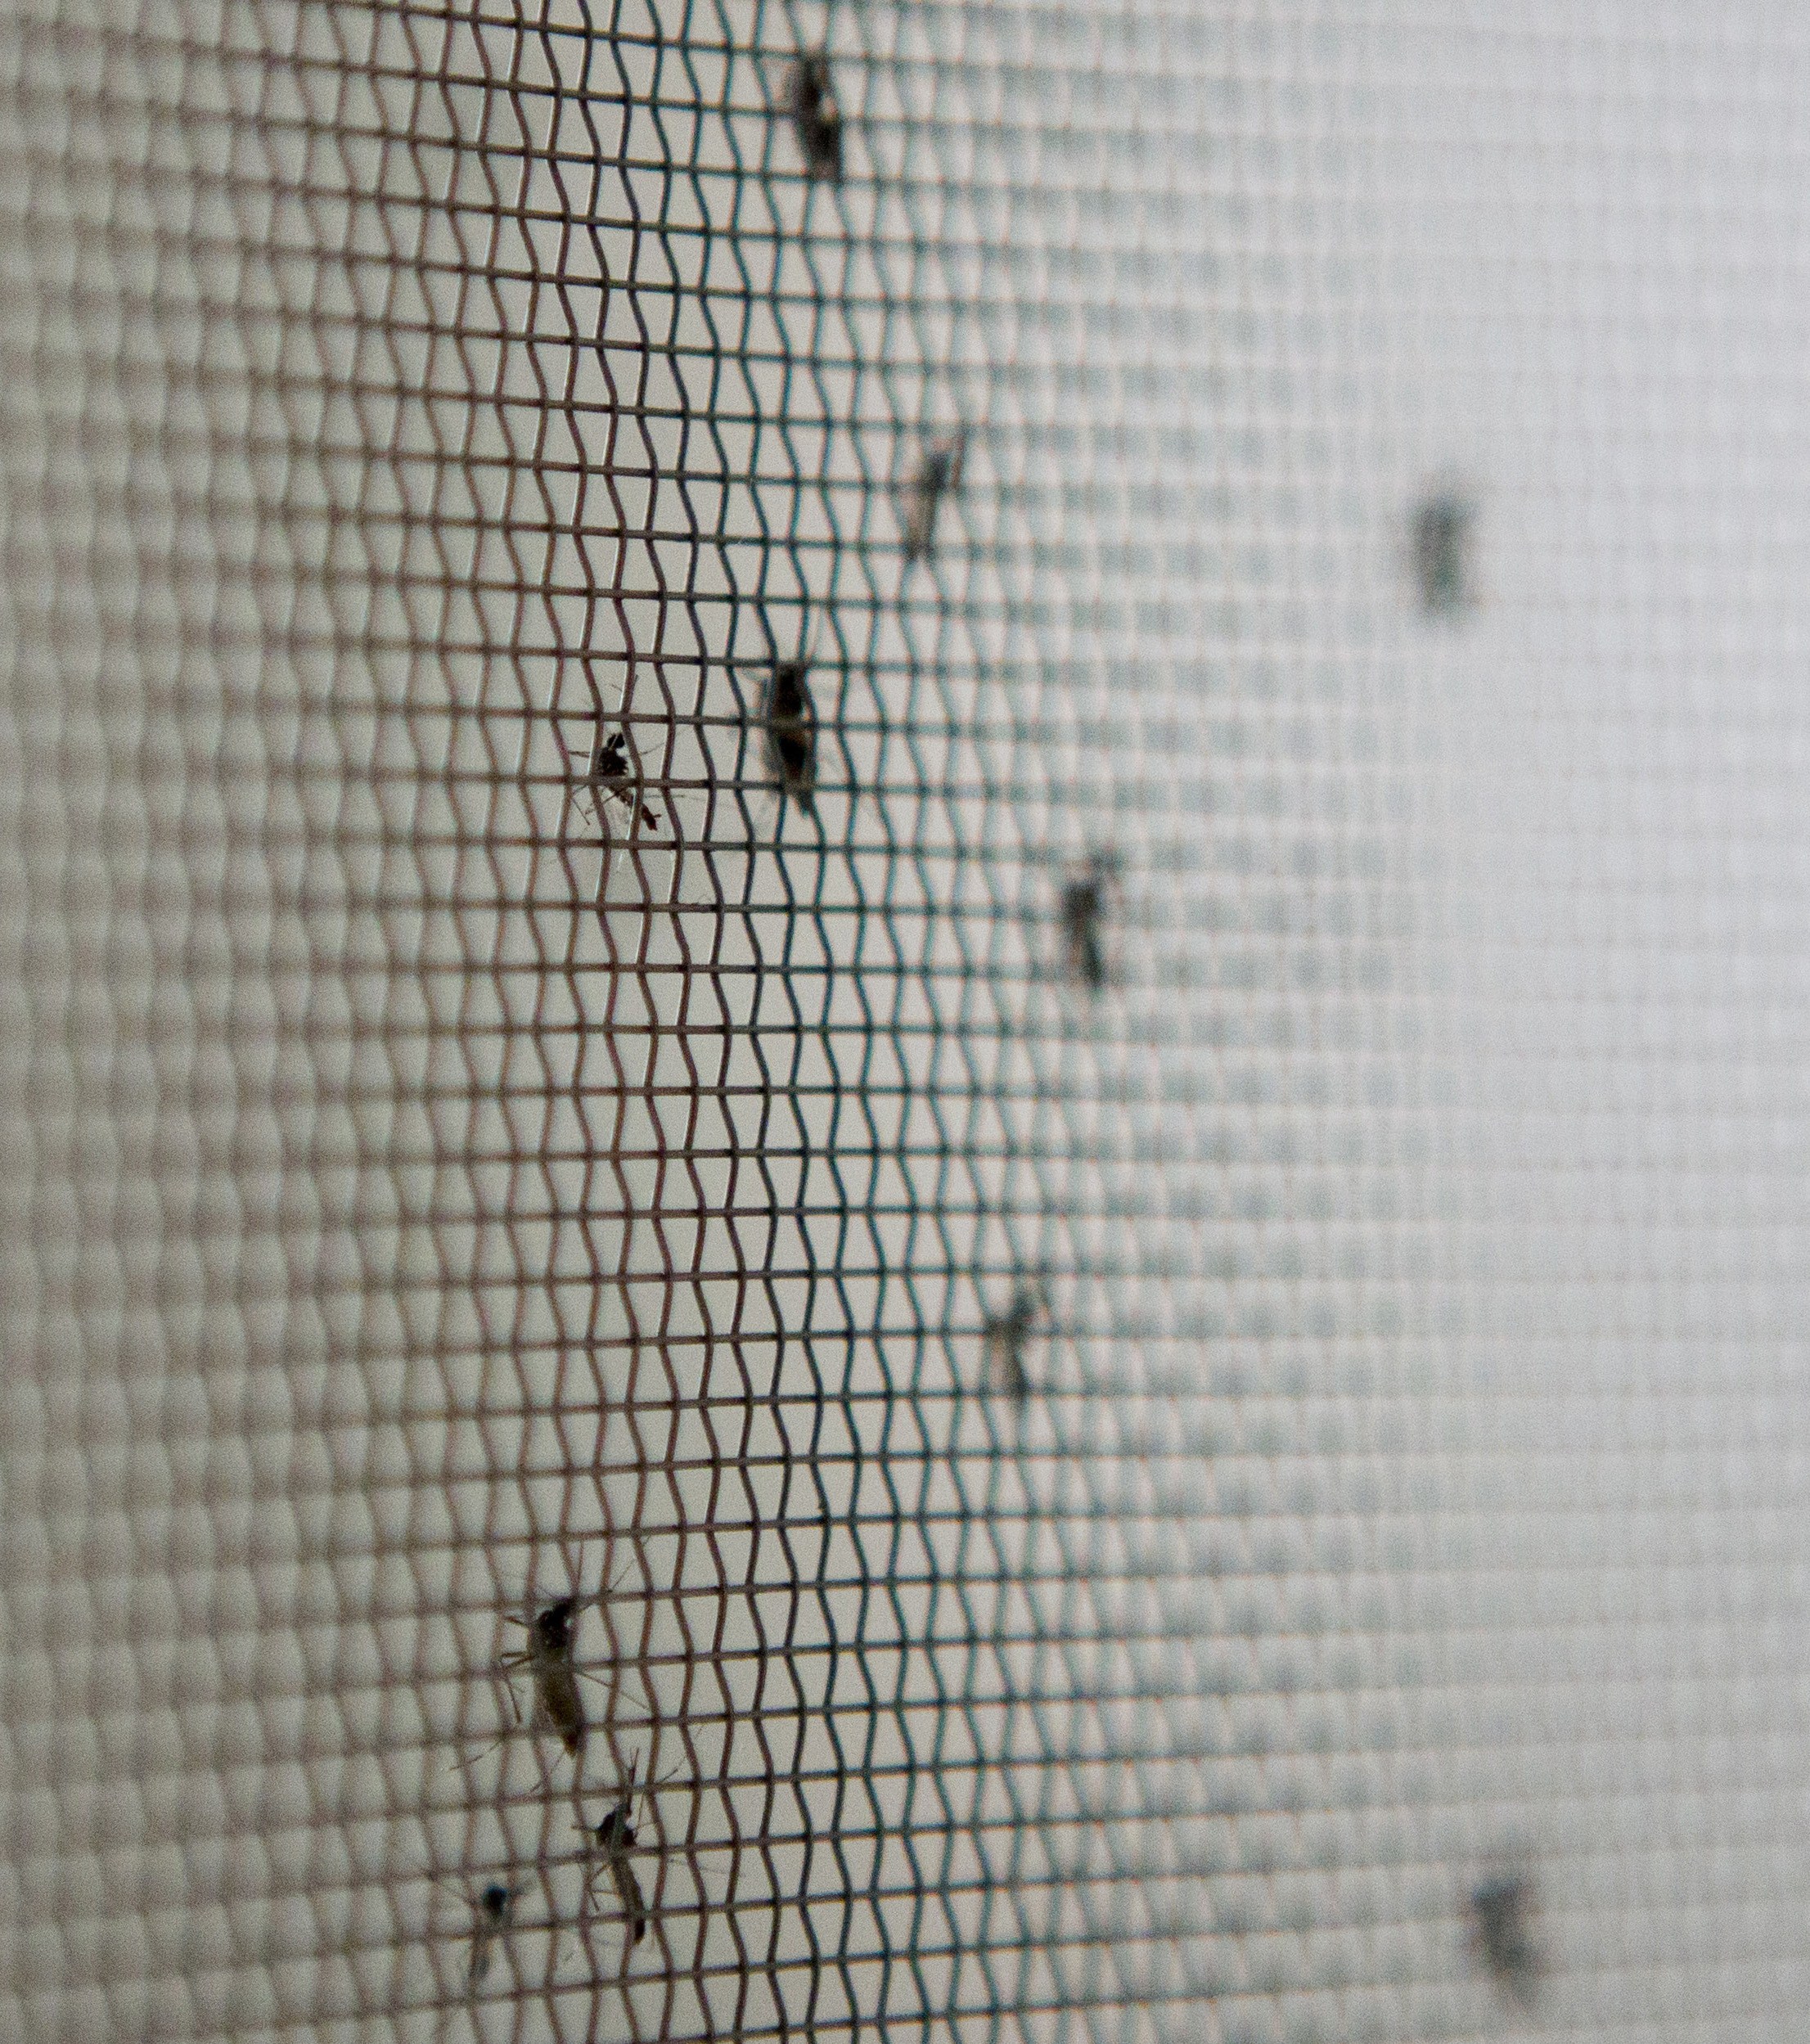 Chikungunya is being locally transmitted throughout the Americas. (Photo credit: Erika Santelices/ Getty Images